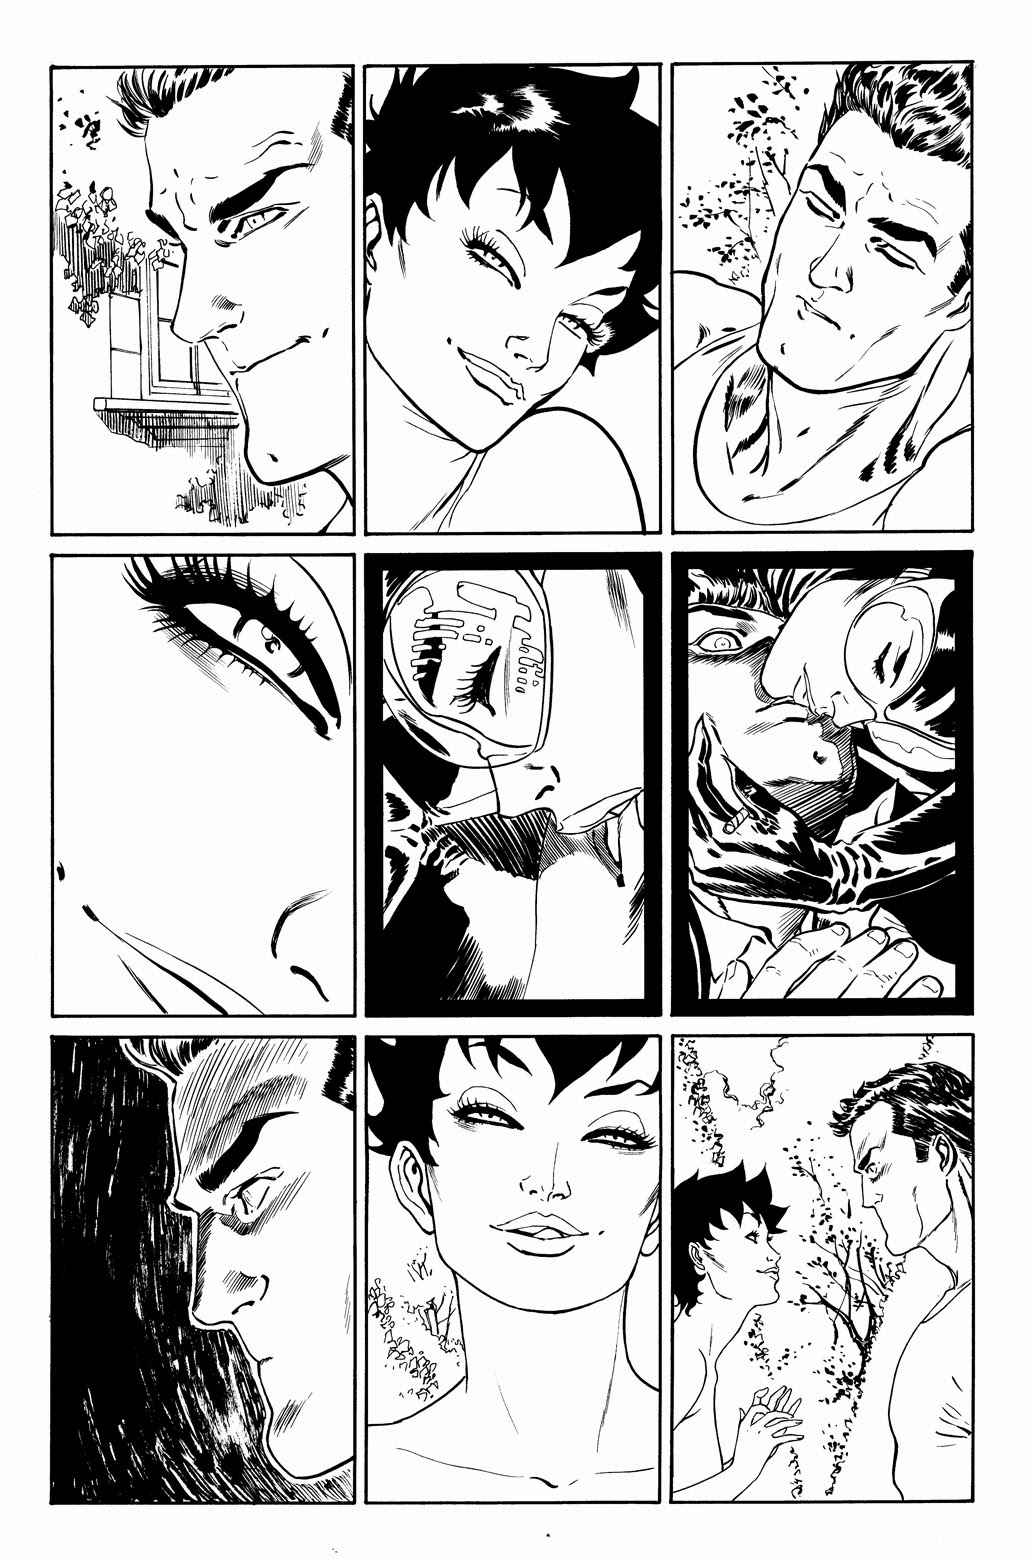 CATWOMAN #04 (more) unseen pages by Guillem March